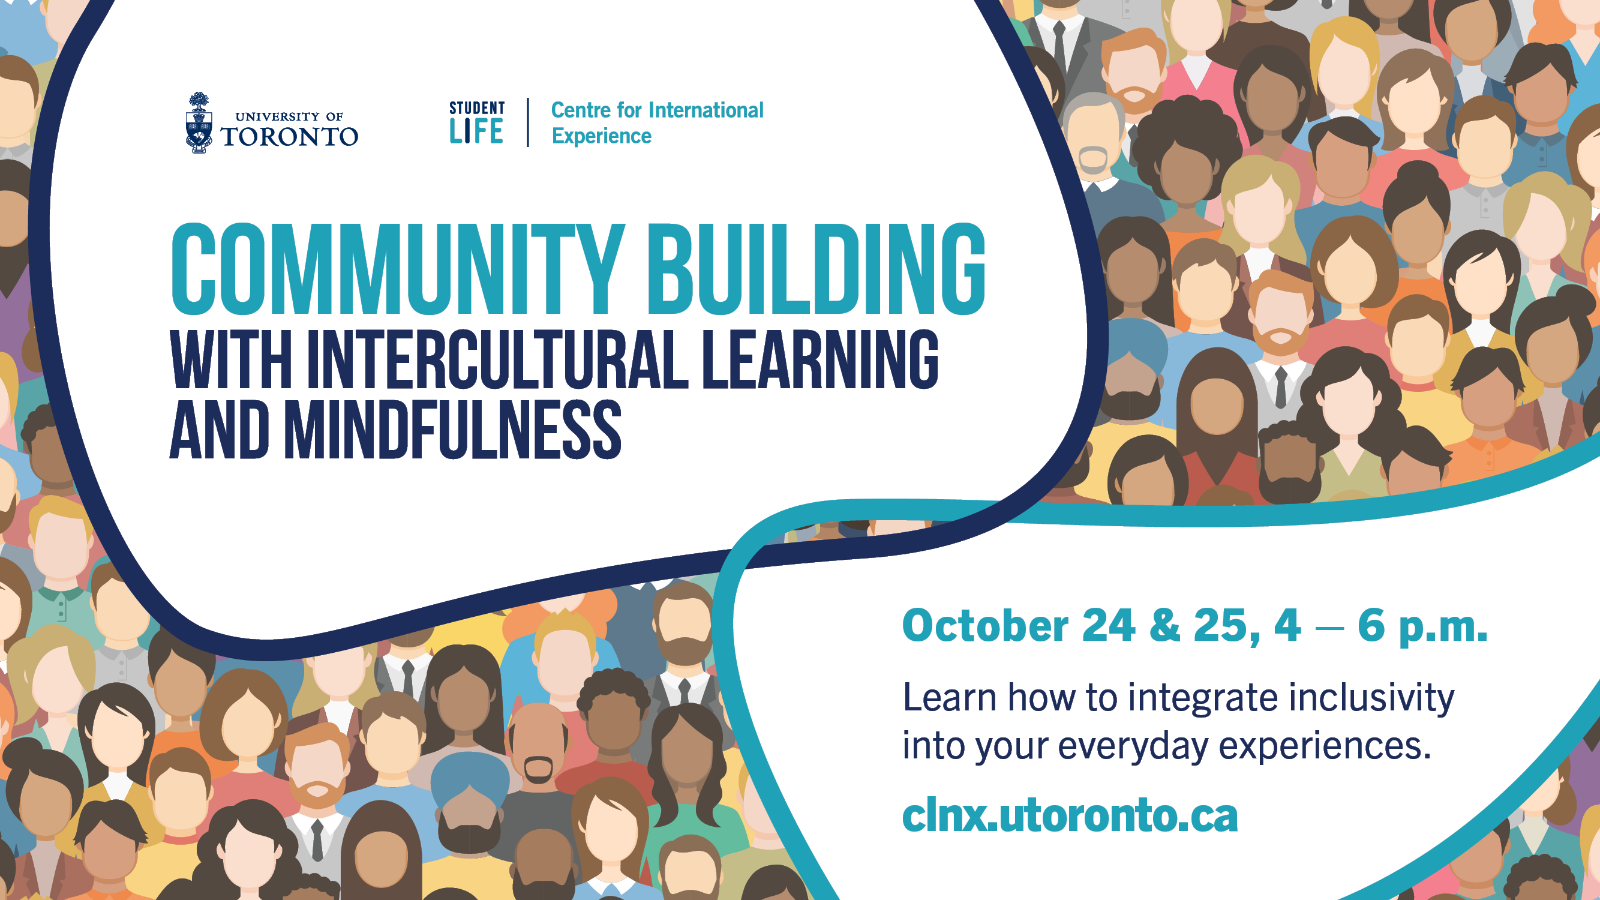 An image with diverse people with text, "Community Building with Intercultural Learning and Mindfulness; October 24 & 25, 4-6 PM; Learn how to integrate inclusivity into your everyday experiences. clnx.utoronto.ca".  